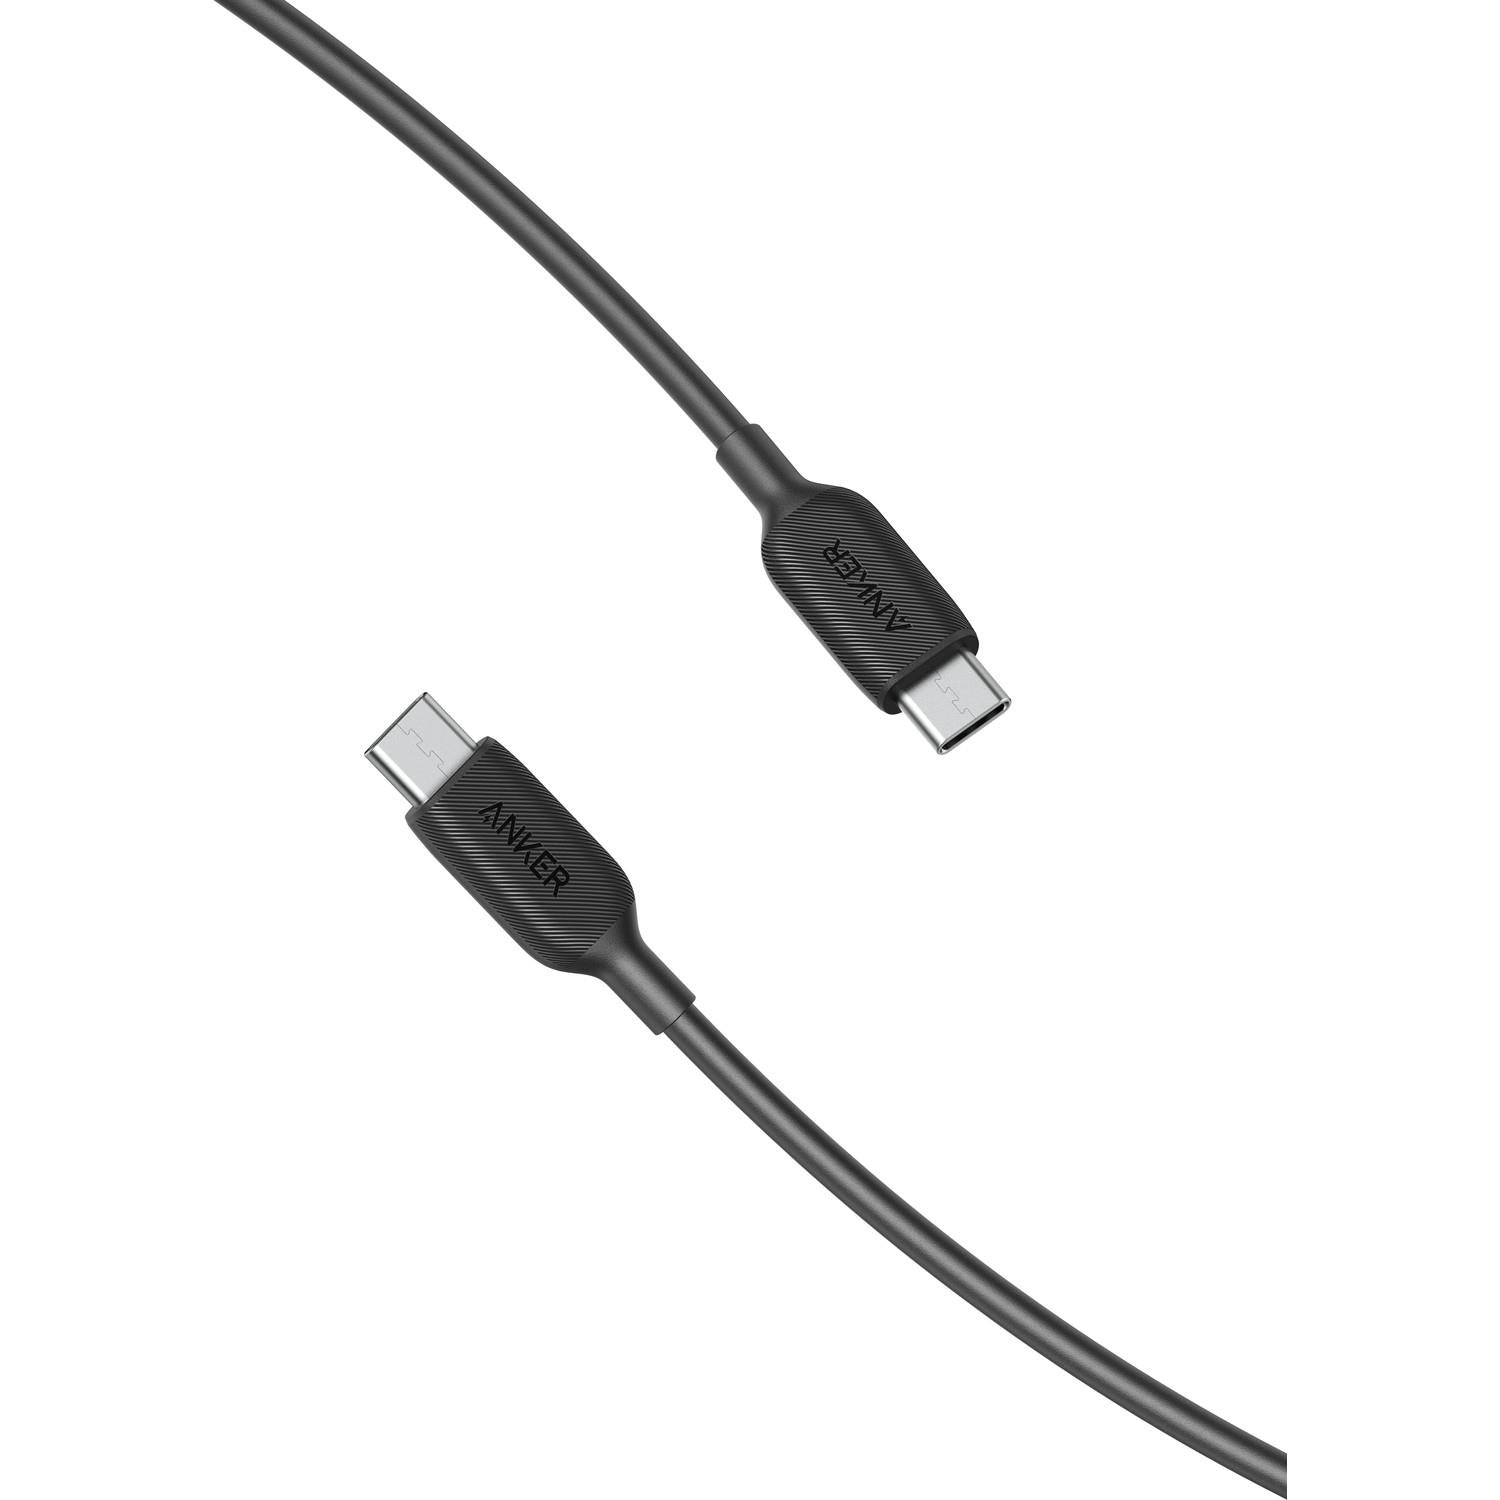 Anker PowerLine III USB-C To USB-C 1.8 Meter Data/Charging Cable - Black - 60W Power Support